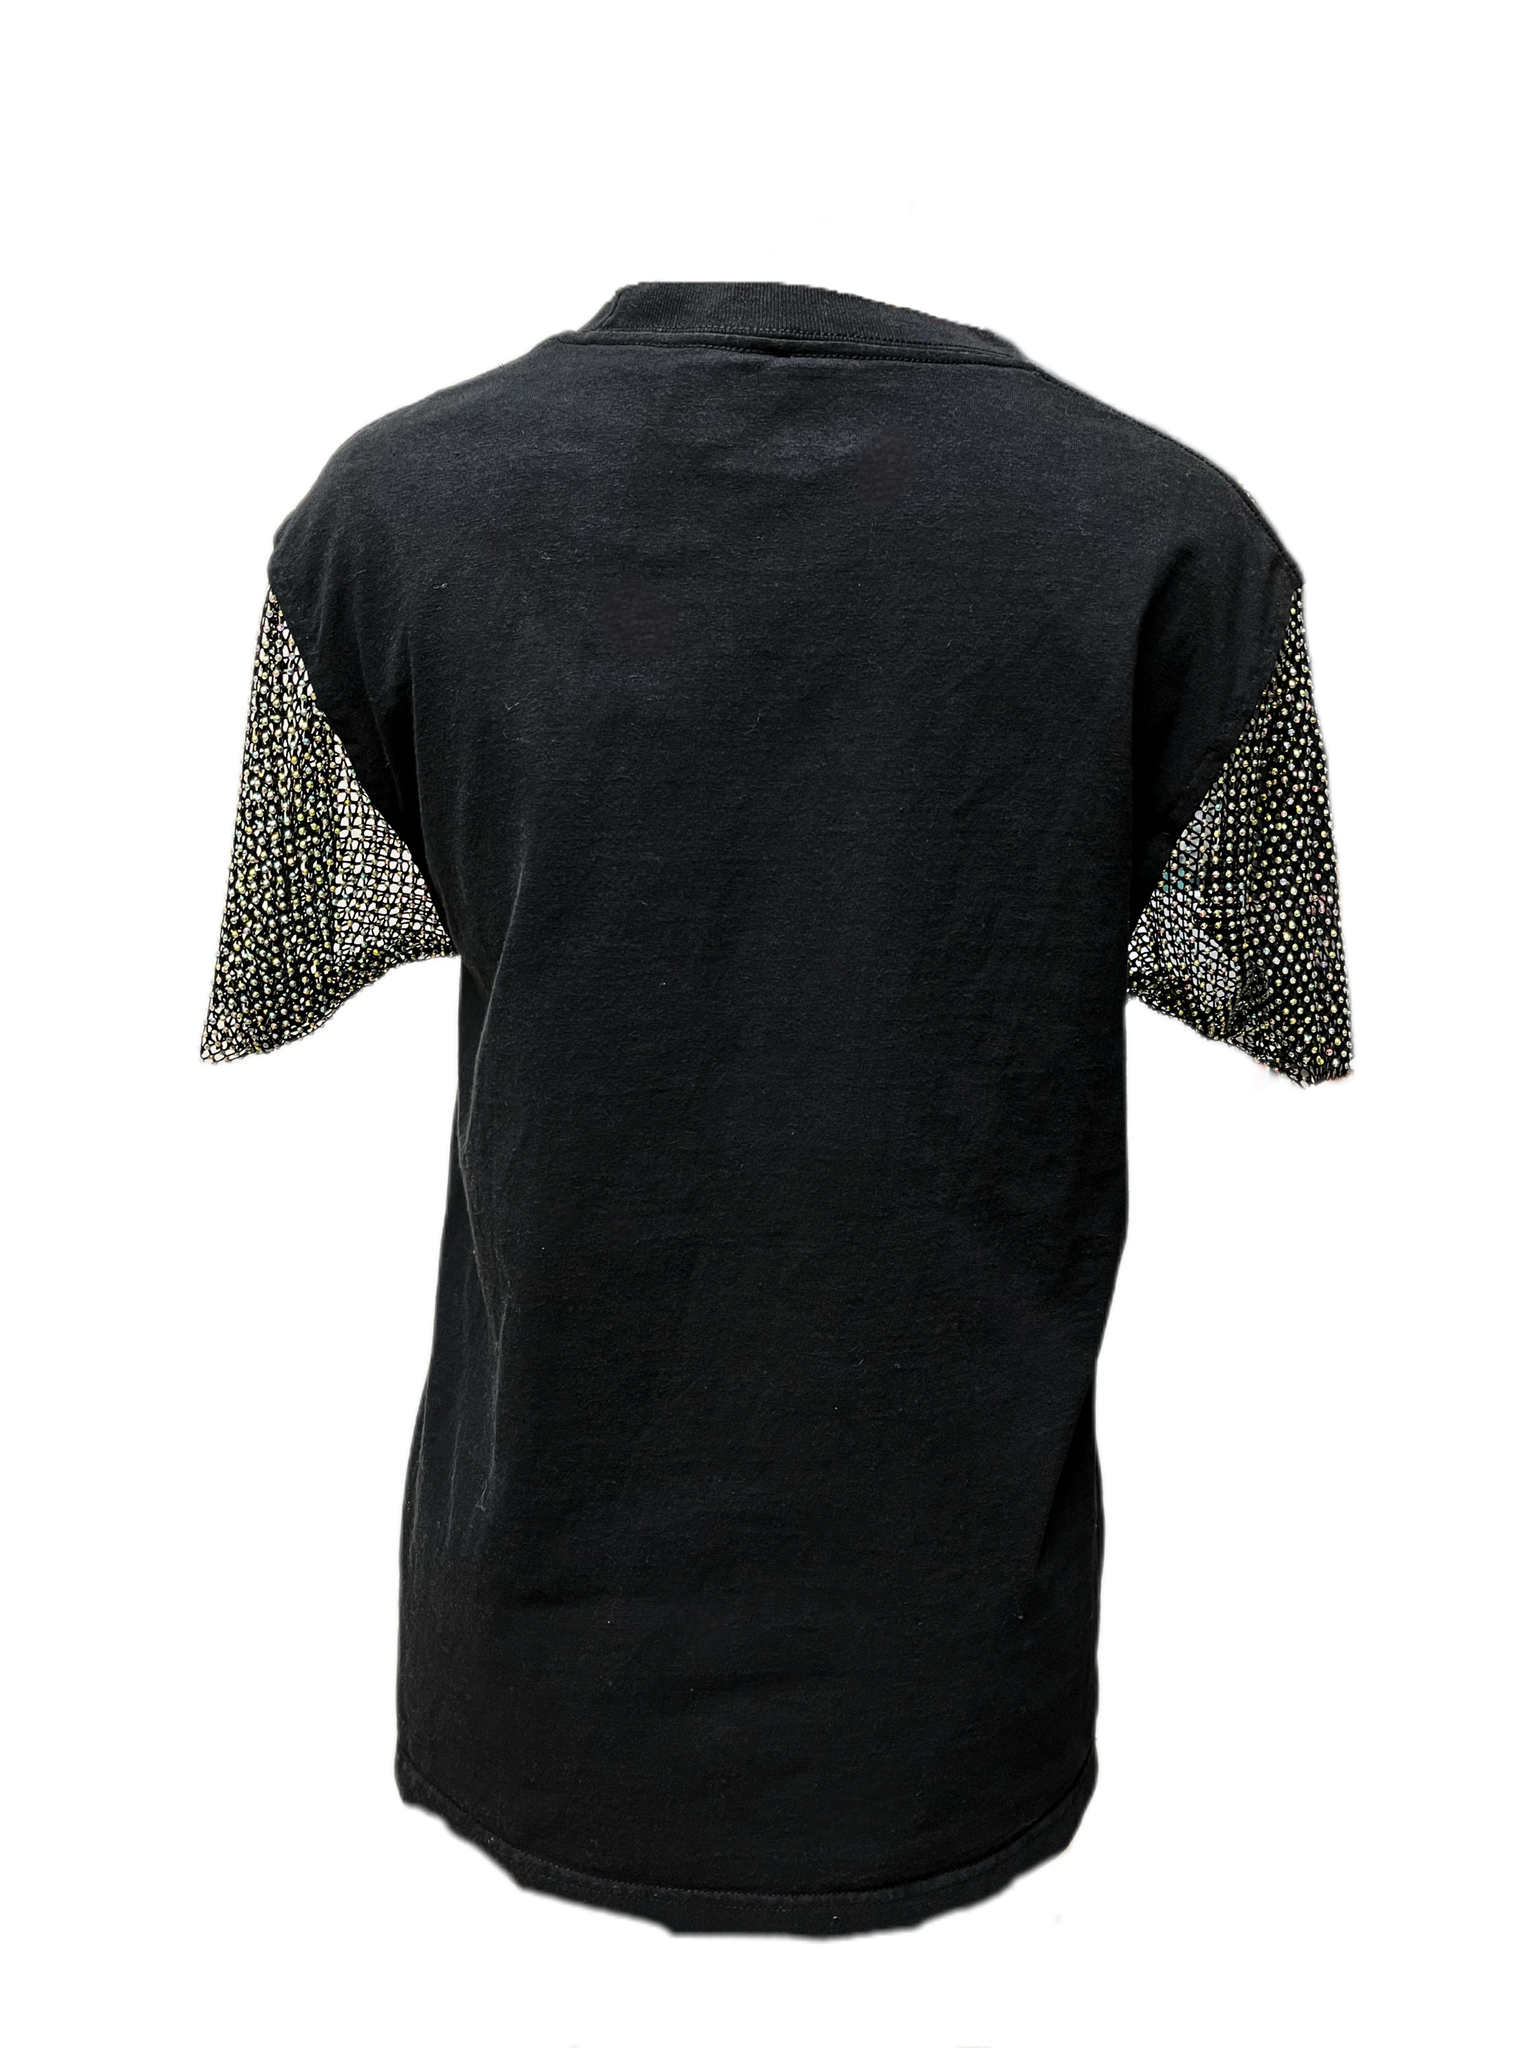 The Rolling Stones Crystal Tee